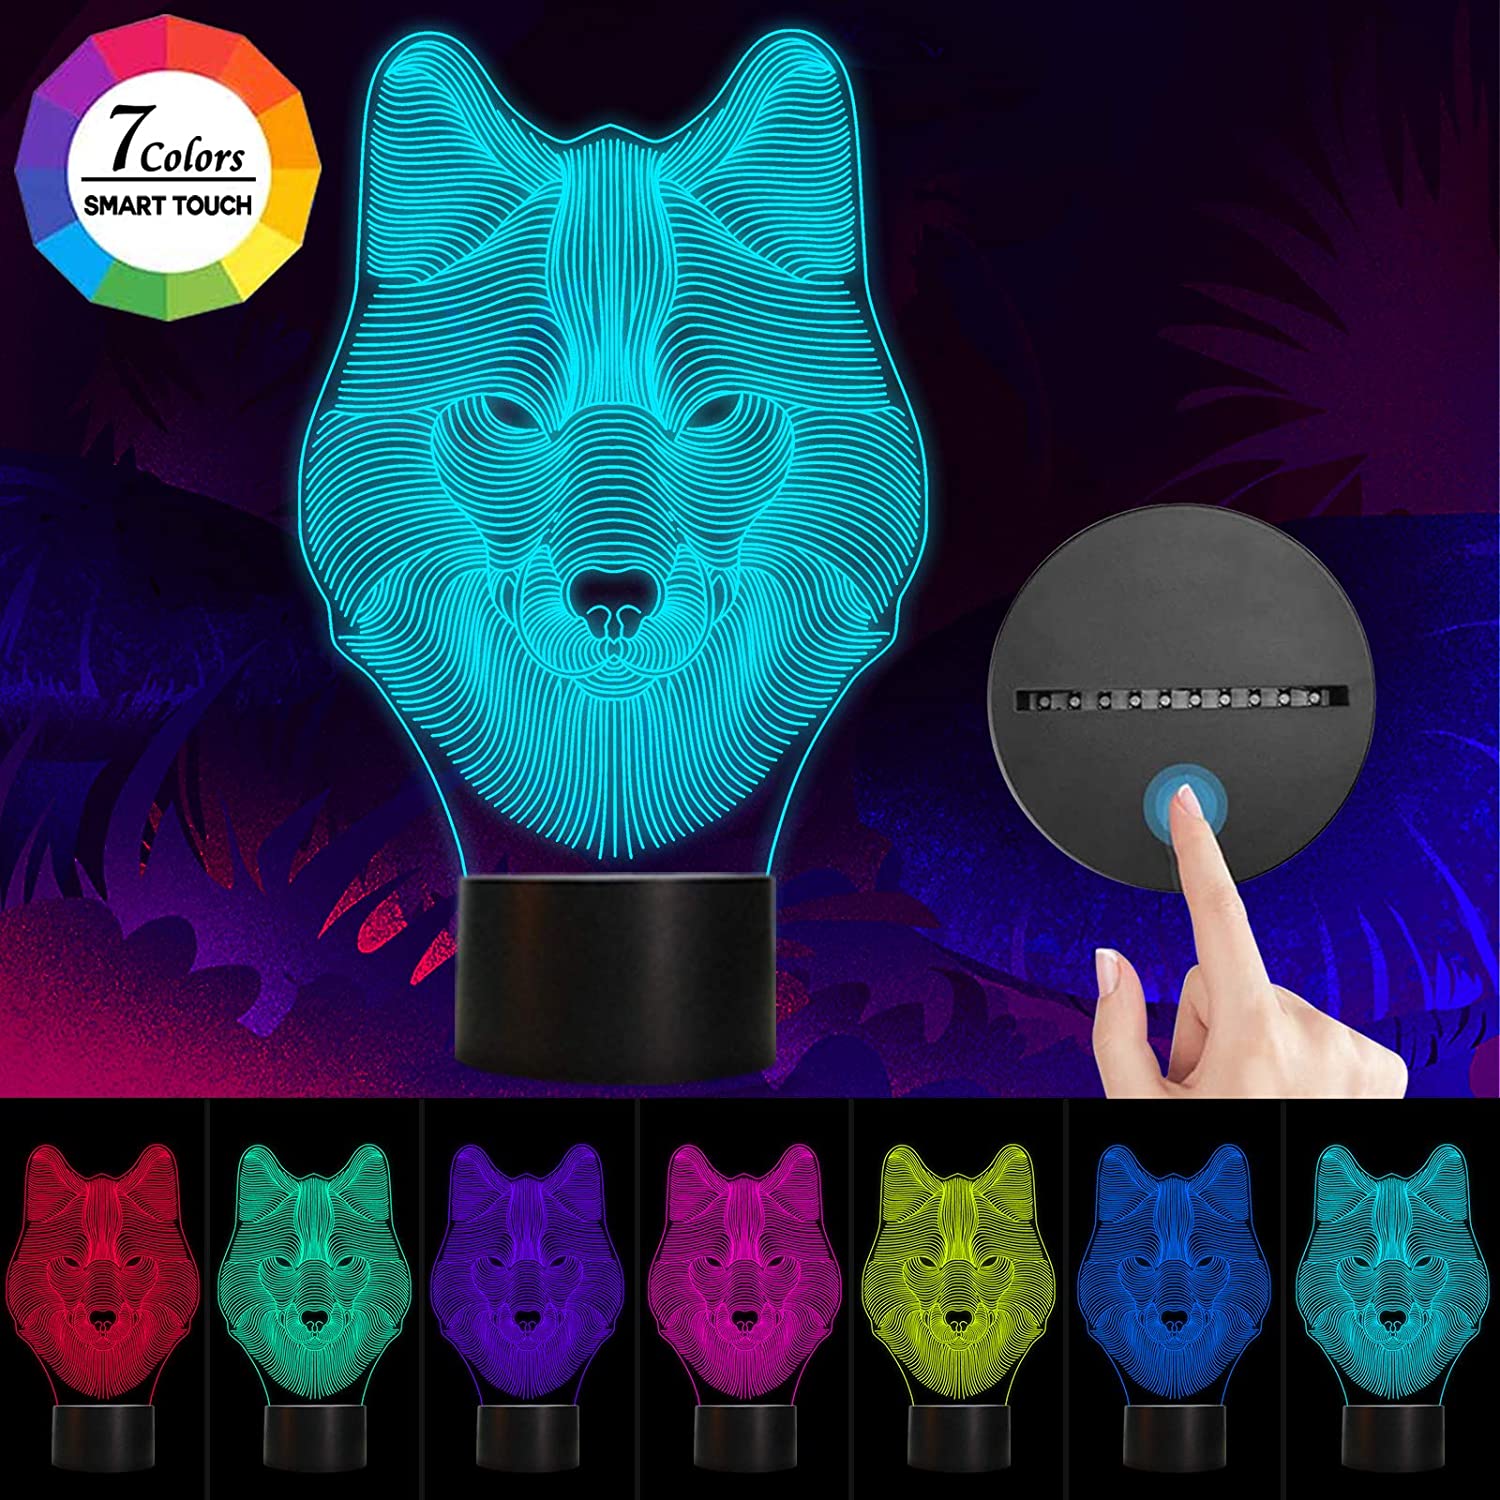 Wolf Led Lamp | Wolf-Horde 16 changing colors